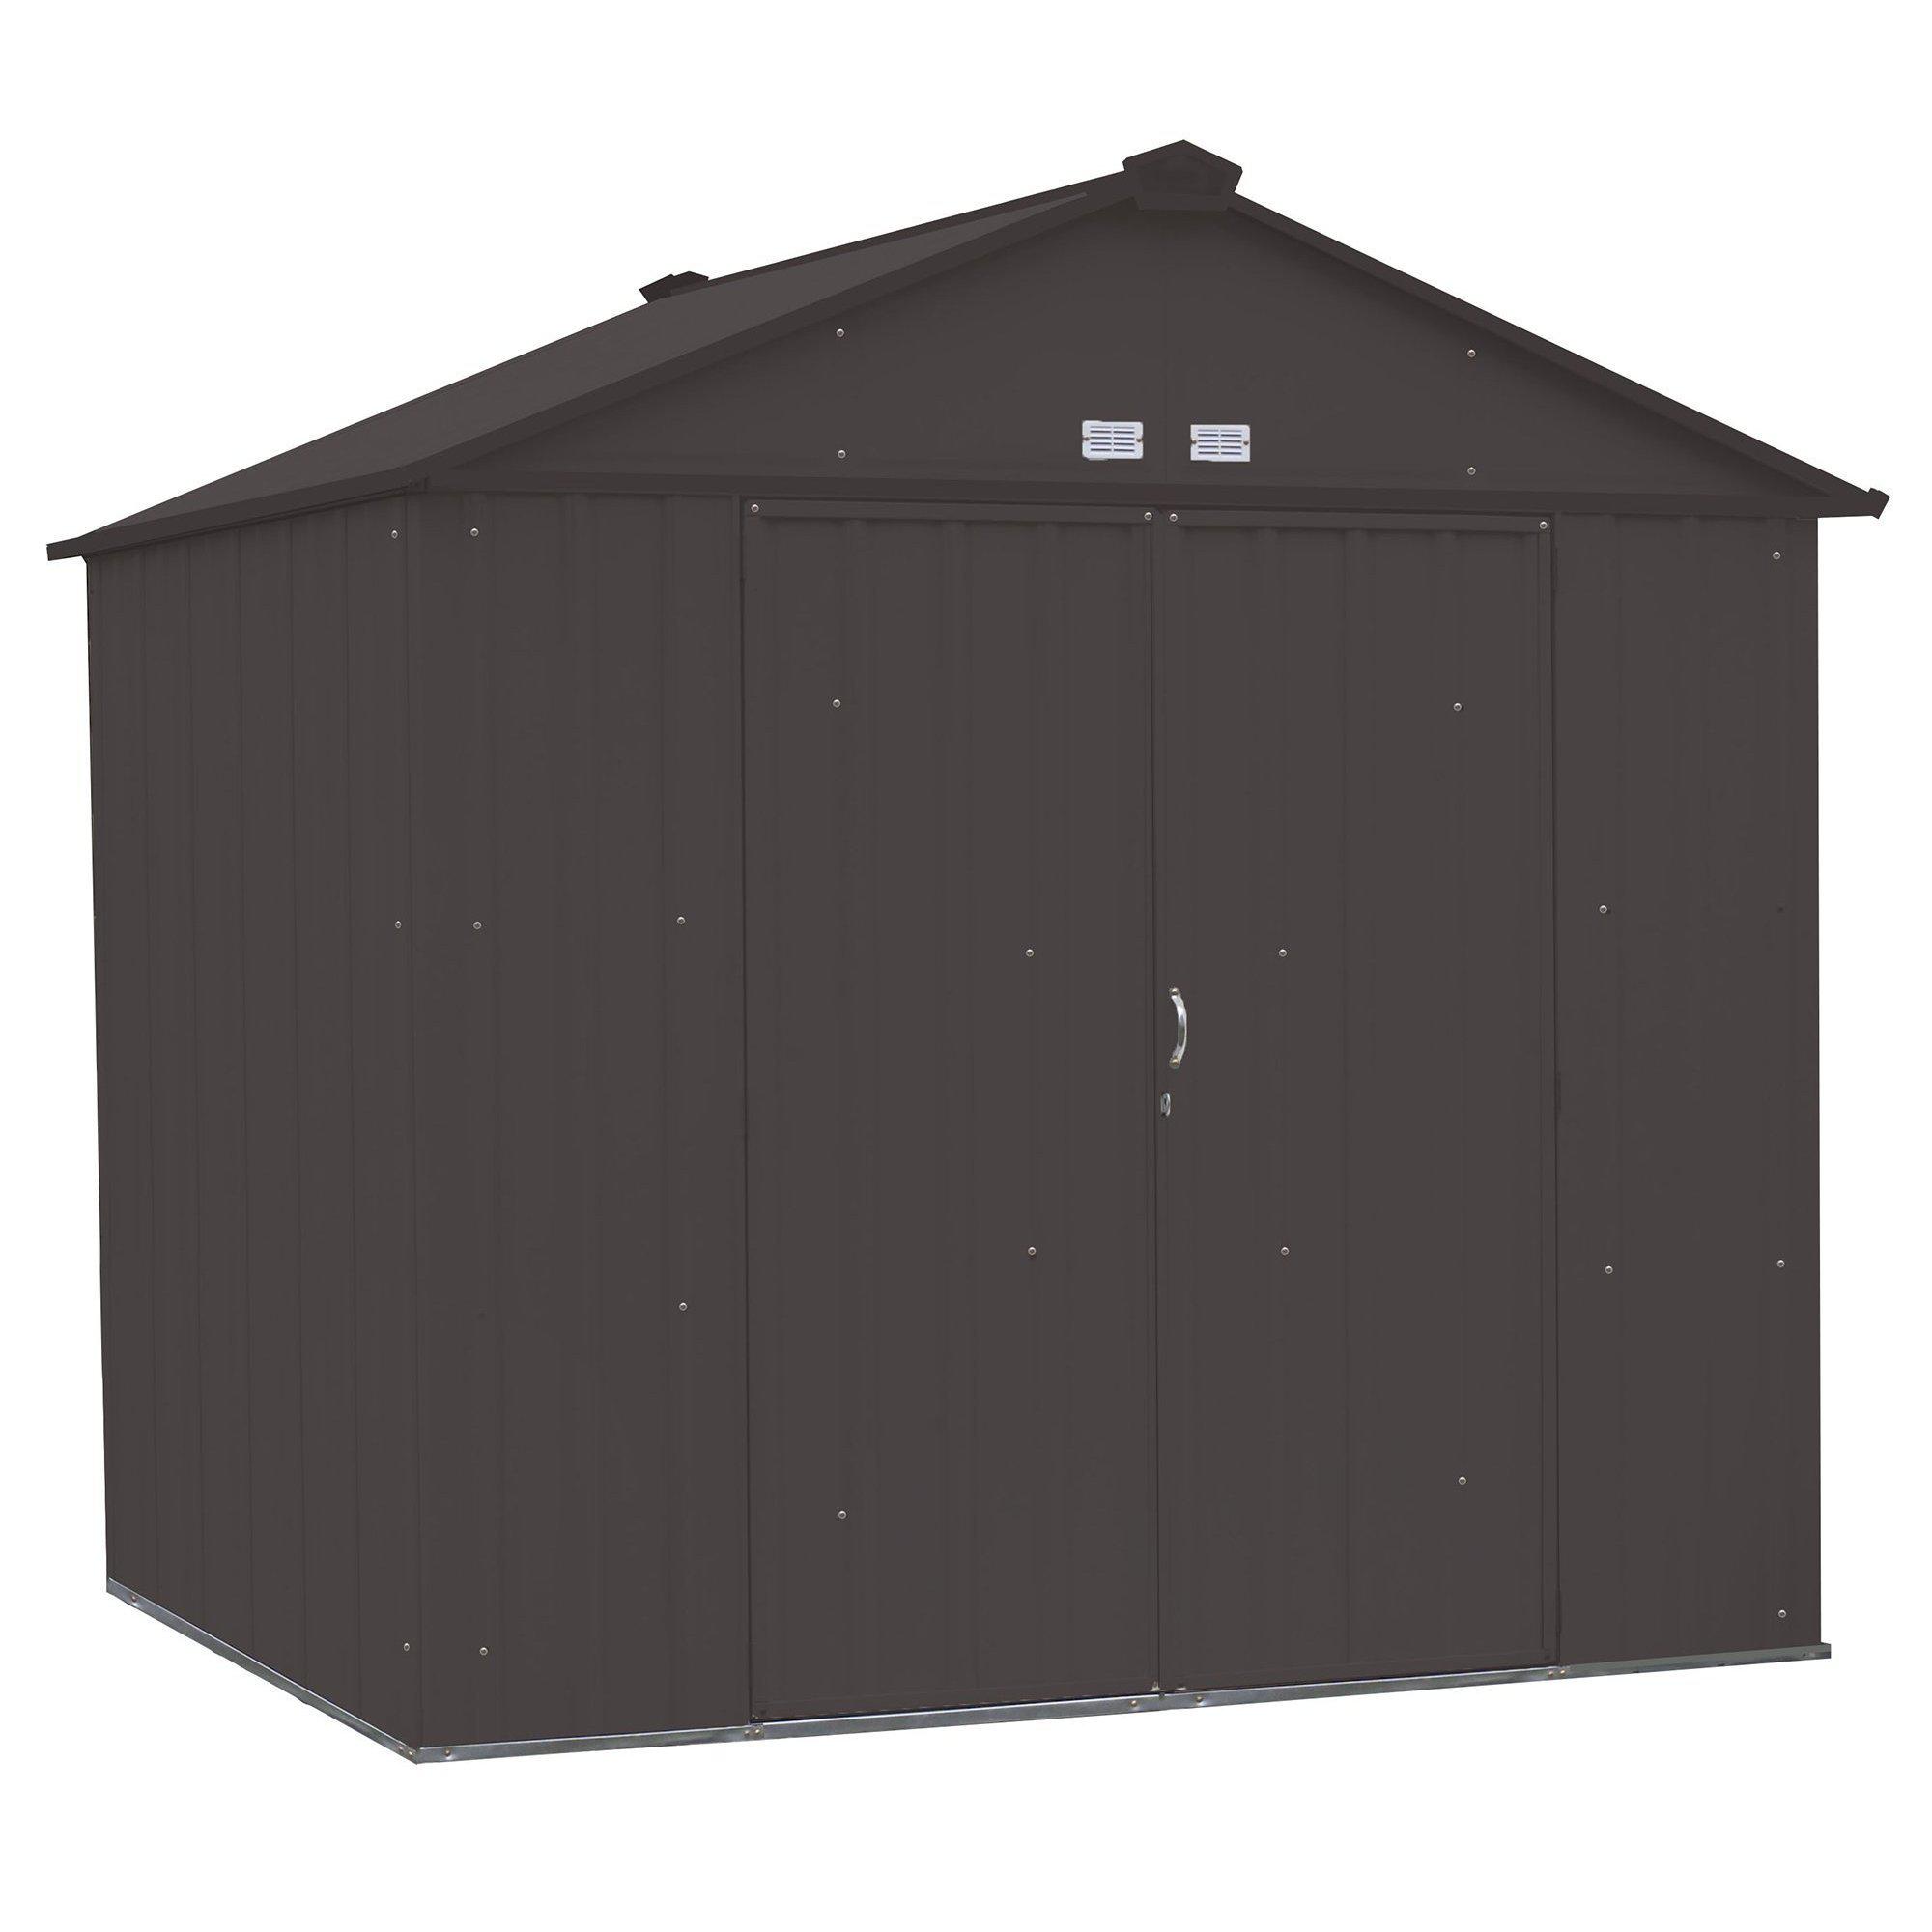 Arrow EZEE Shed High Gable Steel Storage Shed, Charcoal, 8 x 7 ft.